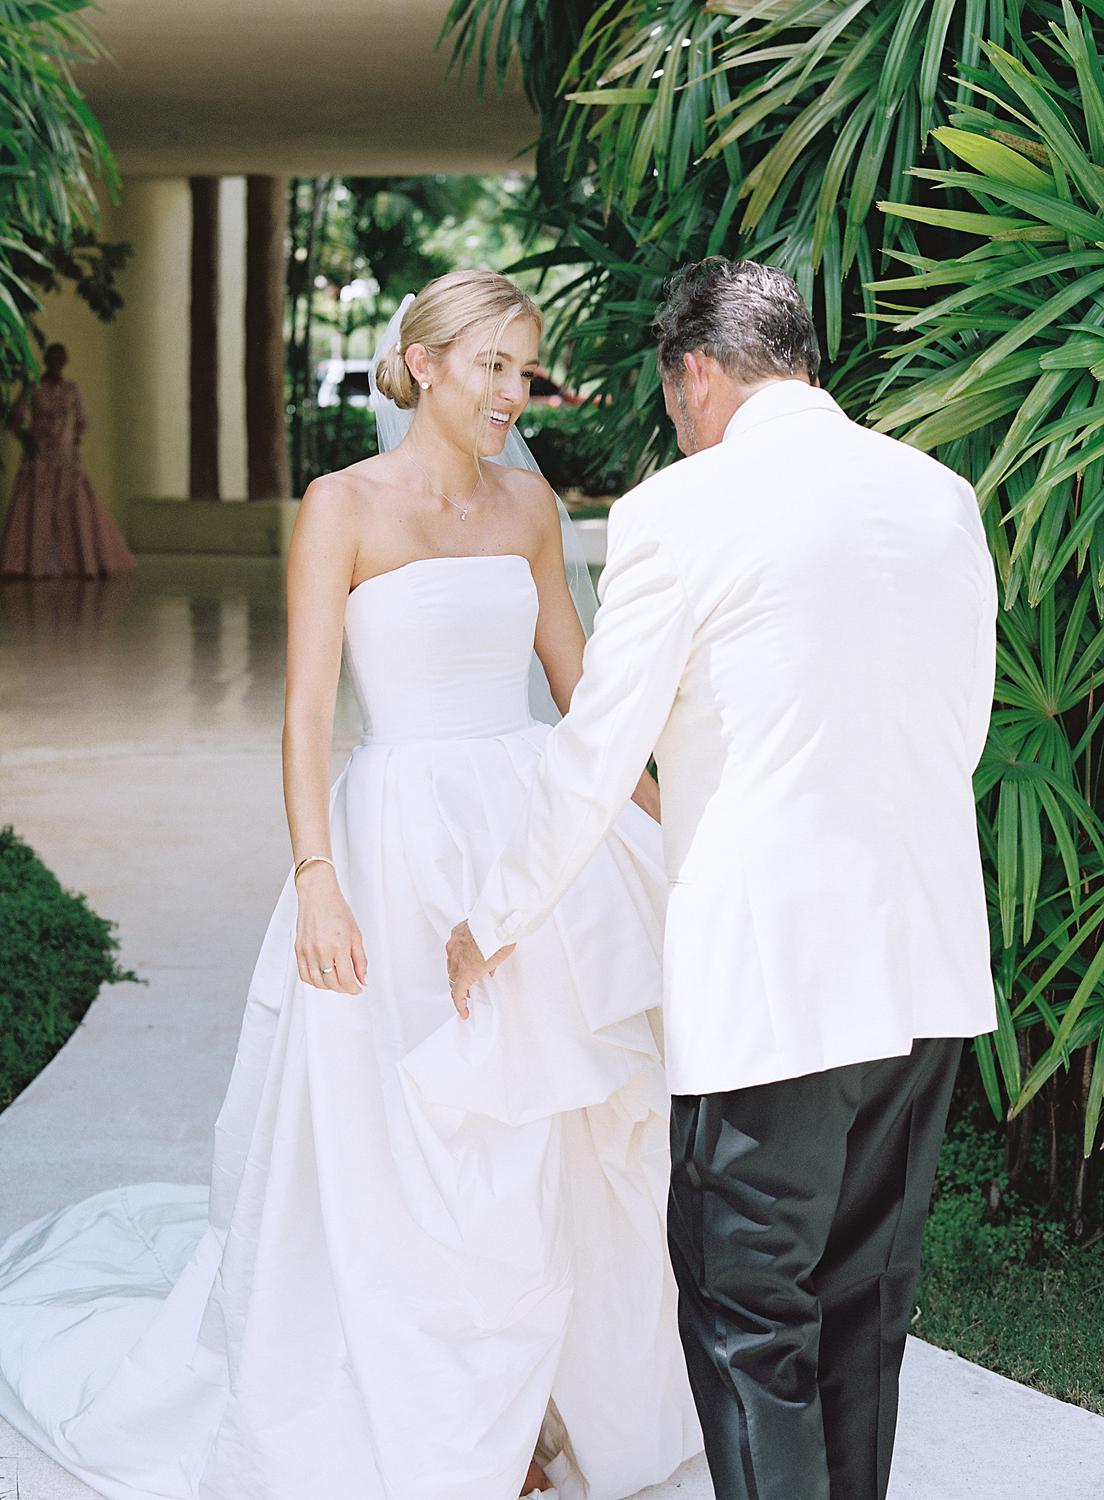 Father seeing the bride for the first time during their wedding at Altos de Chavón.